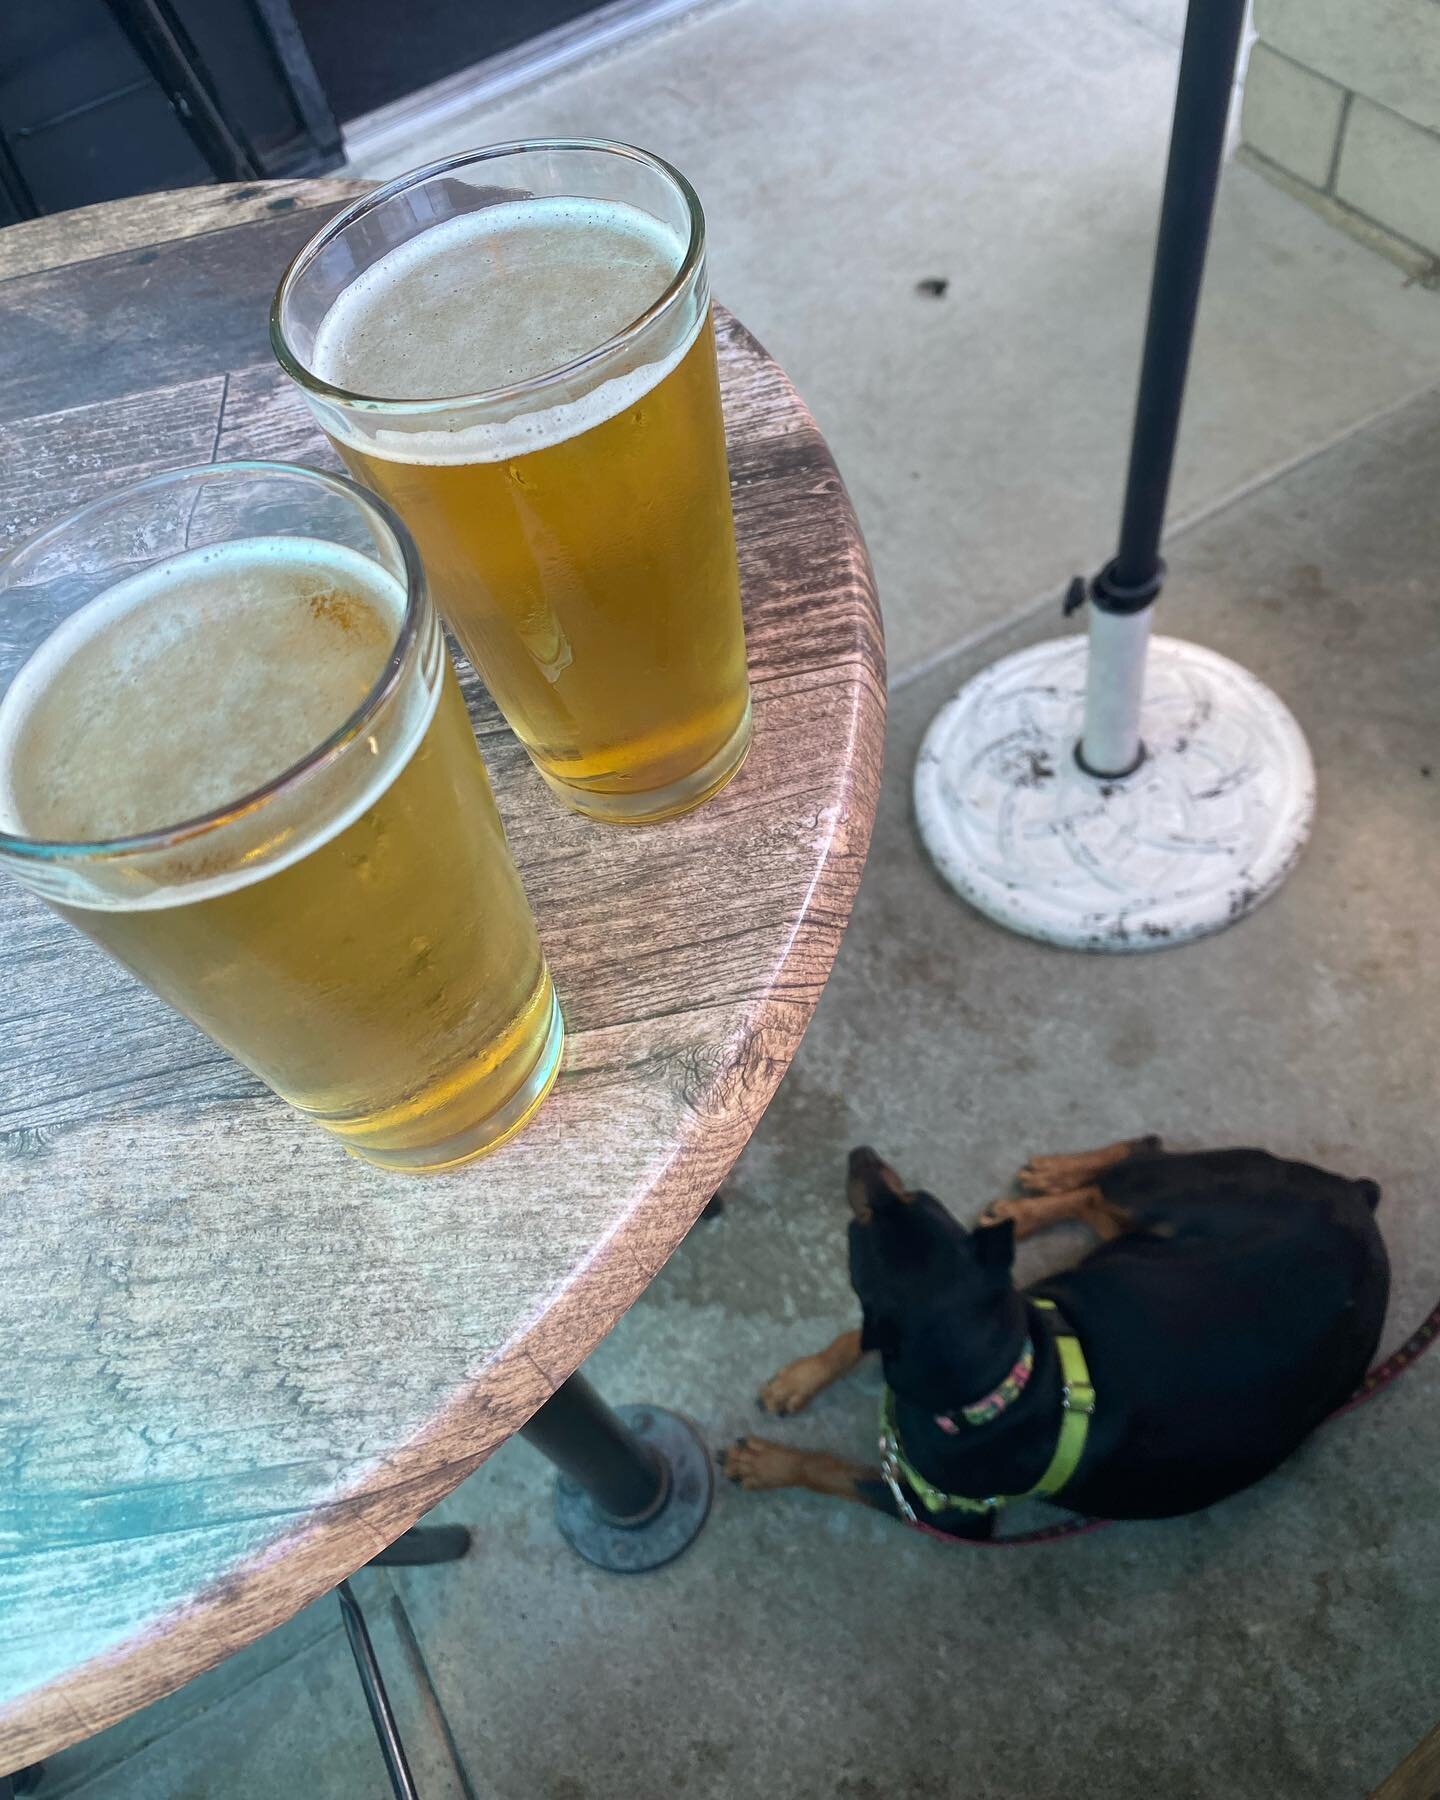 We&rsquo;re Open (12-7p) today on this Labor Day Monday!  Grab your Buddy and come inside out of the heat! #dogfriendly #craftbeer #threesheetsbeer #dublinca  #eastbaybeer #bayareabeer #trivalley